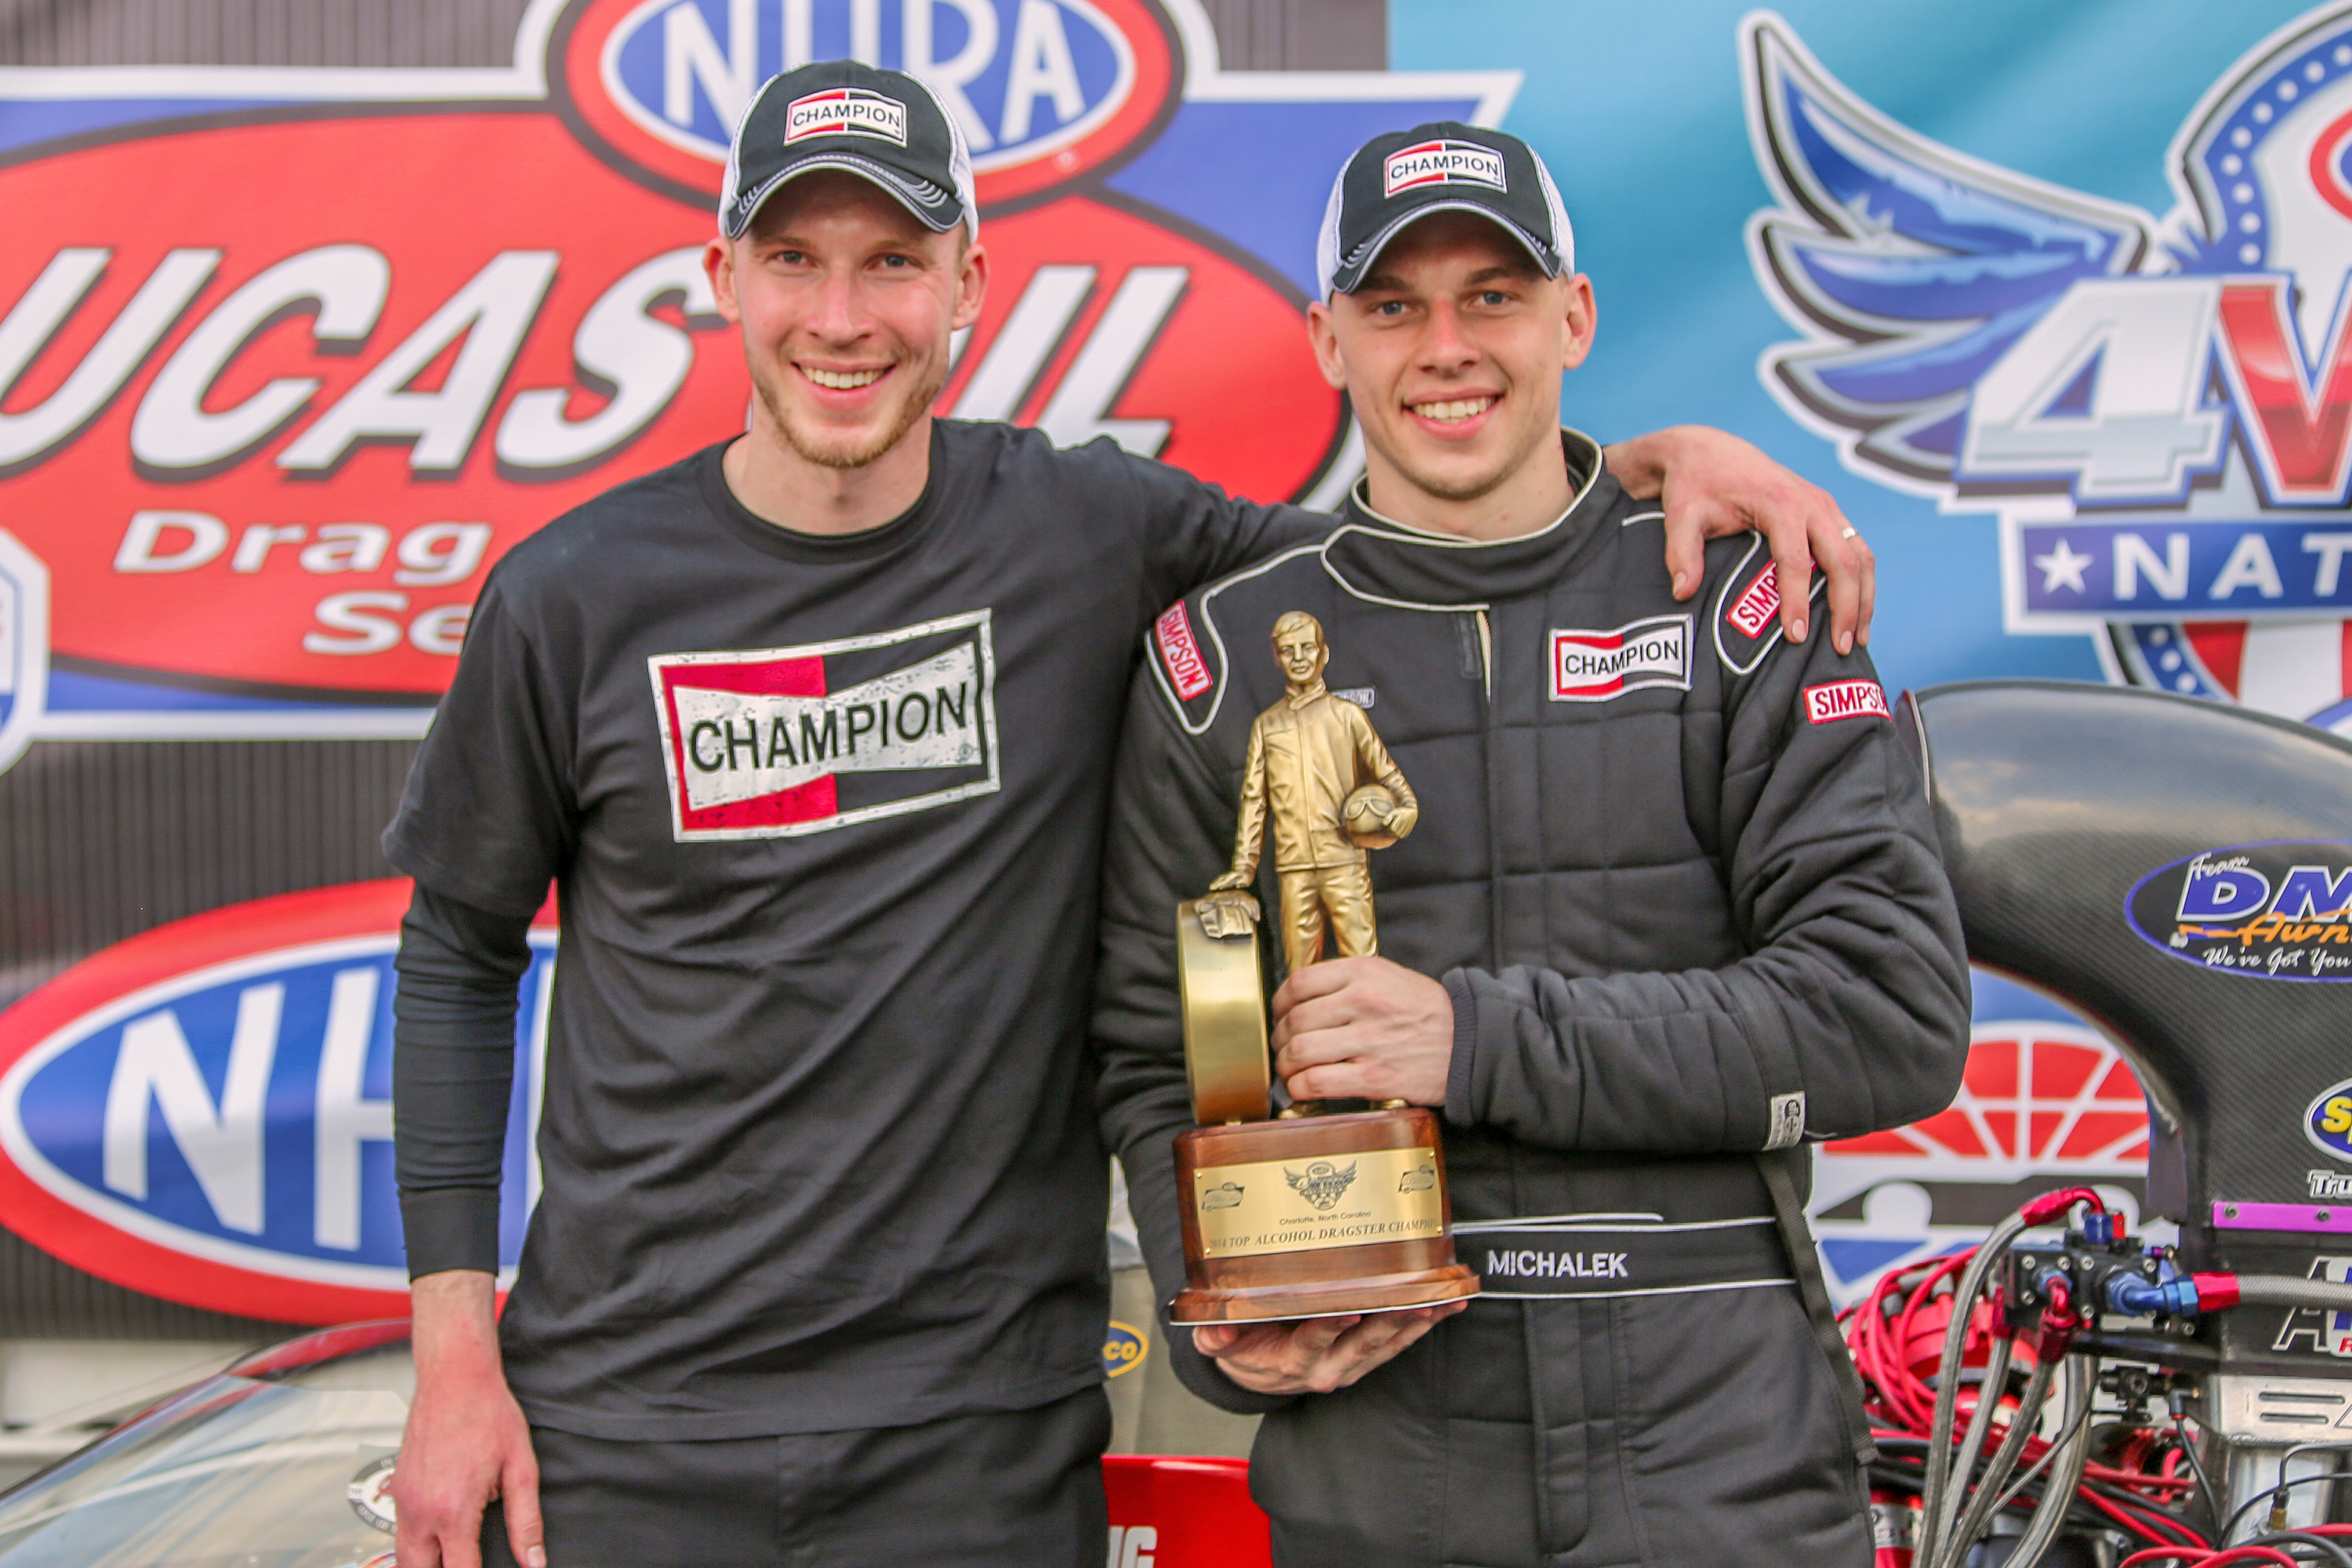 Kyle and Corey Michalek teamed up with Dreher Motorsports to win the 2014 NHRA Four-Wide Nationals in Charlotte, North Carolina.